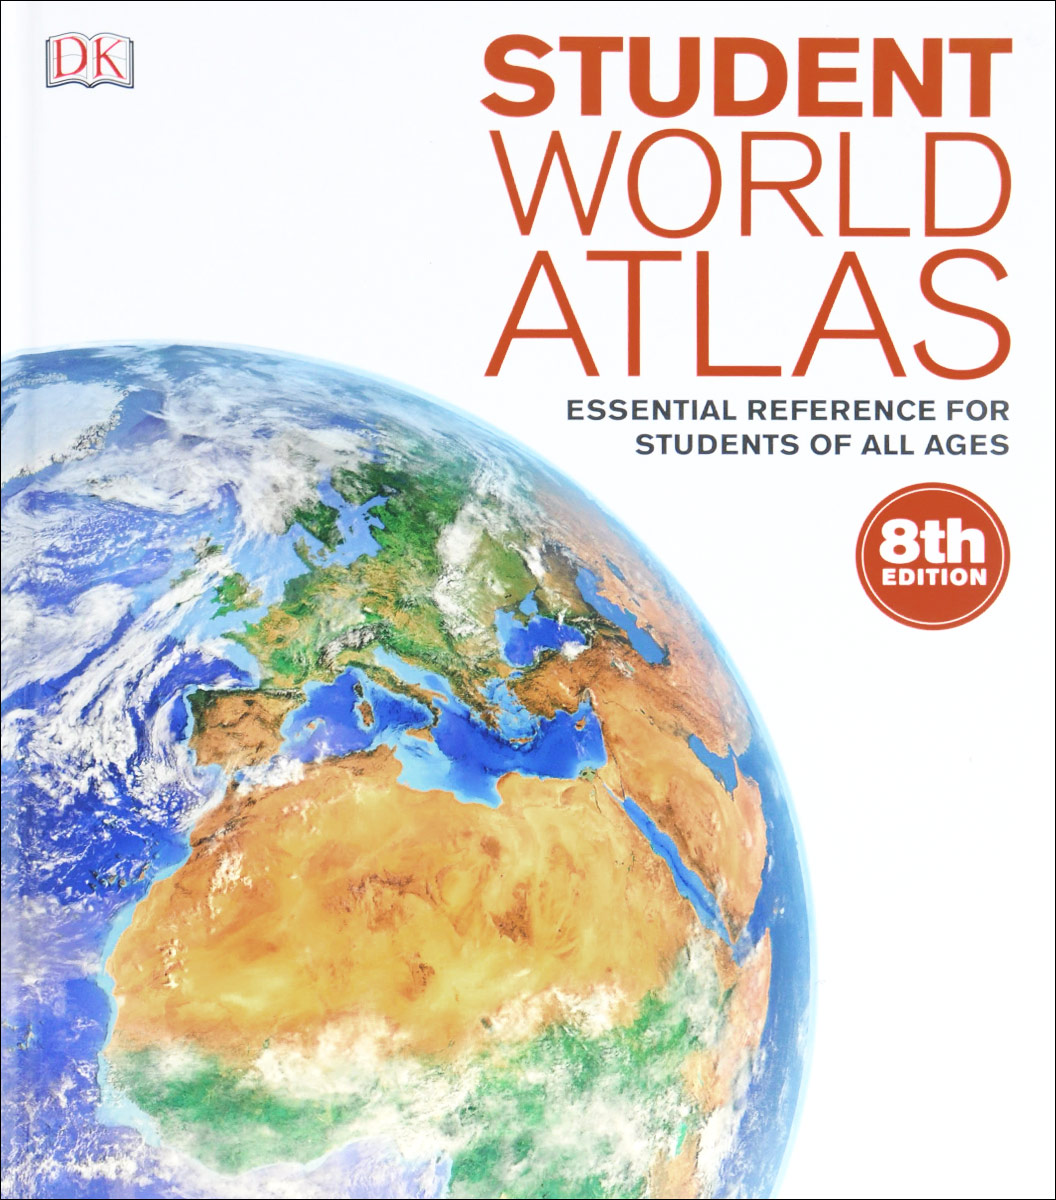 Student World Atlas12296407Fully revised and updated for an 8th edition, the Student World Atlas brings the Earths geography to life with state-of-the-art mapping from up-to-date satellite and cartographic sources. Detailed maps reveal the Earths physical structure, oceans, climate, population and economy. Borders and boundaries of the worlds countries have been fully updated and are clearly explained, while a world fact-file and gazetteer highlight key statistical data for each country, allowing direct comparisons between nations. A section devoted to learning map skills develops your understanding and practical use of maps. Student World Atlas is the perfect geography resource and an essential reference for students of all ages.